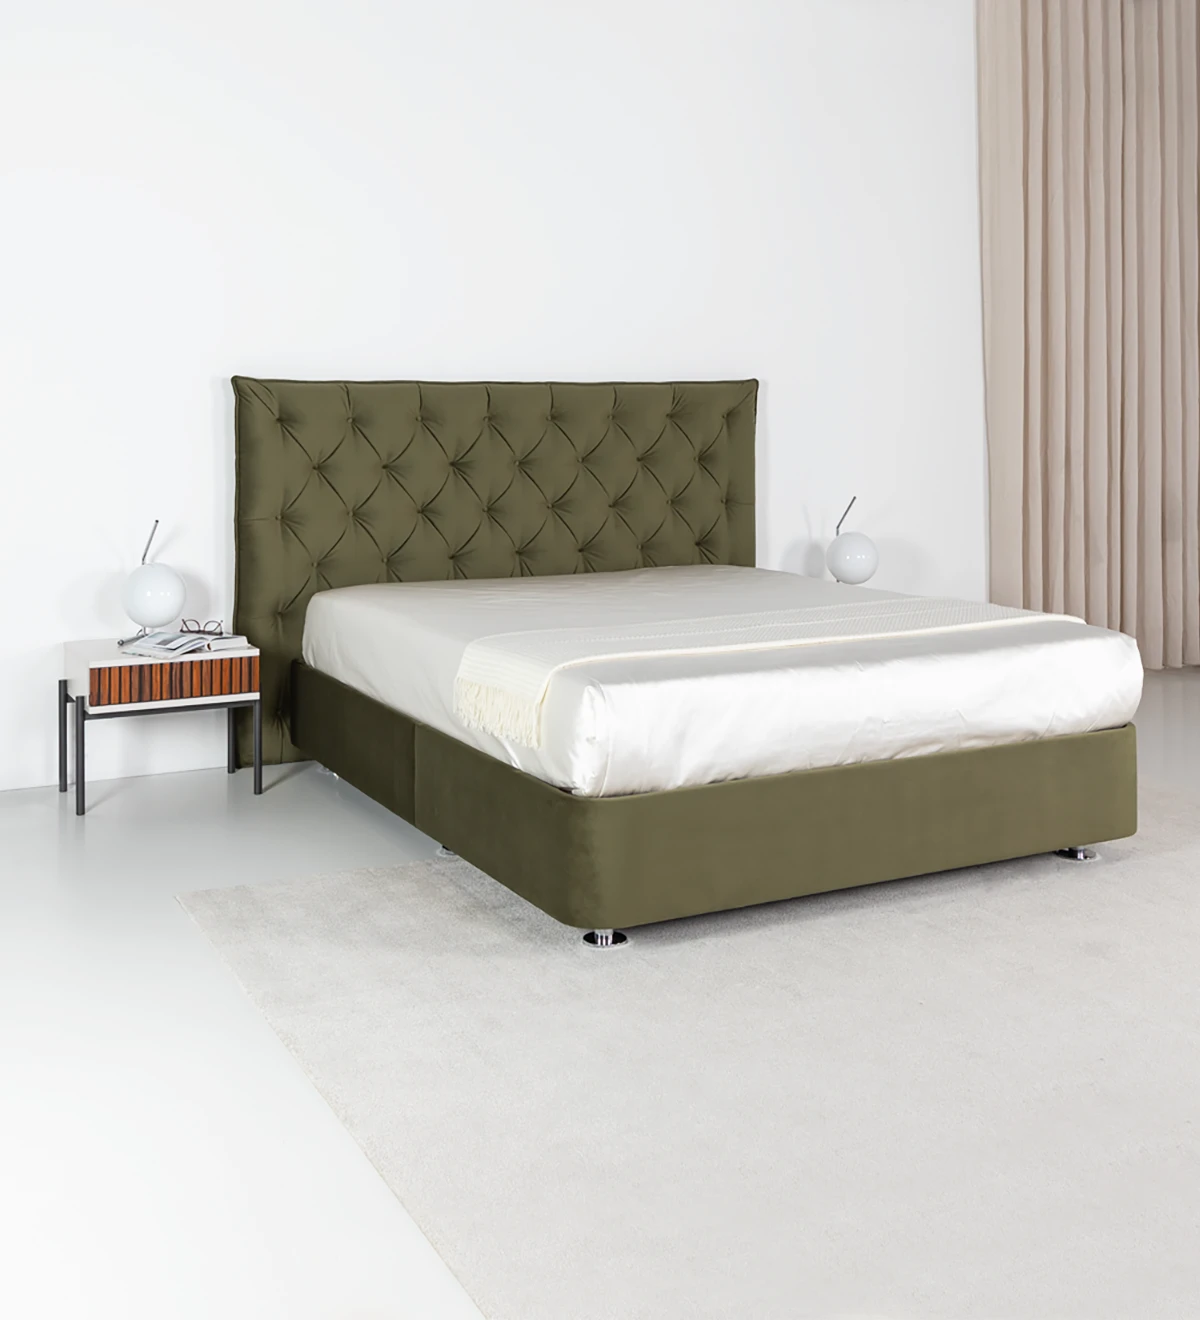 Double sommier upholstered in fabric, with lift-up bed for storage.